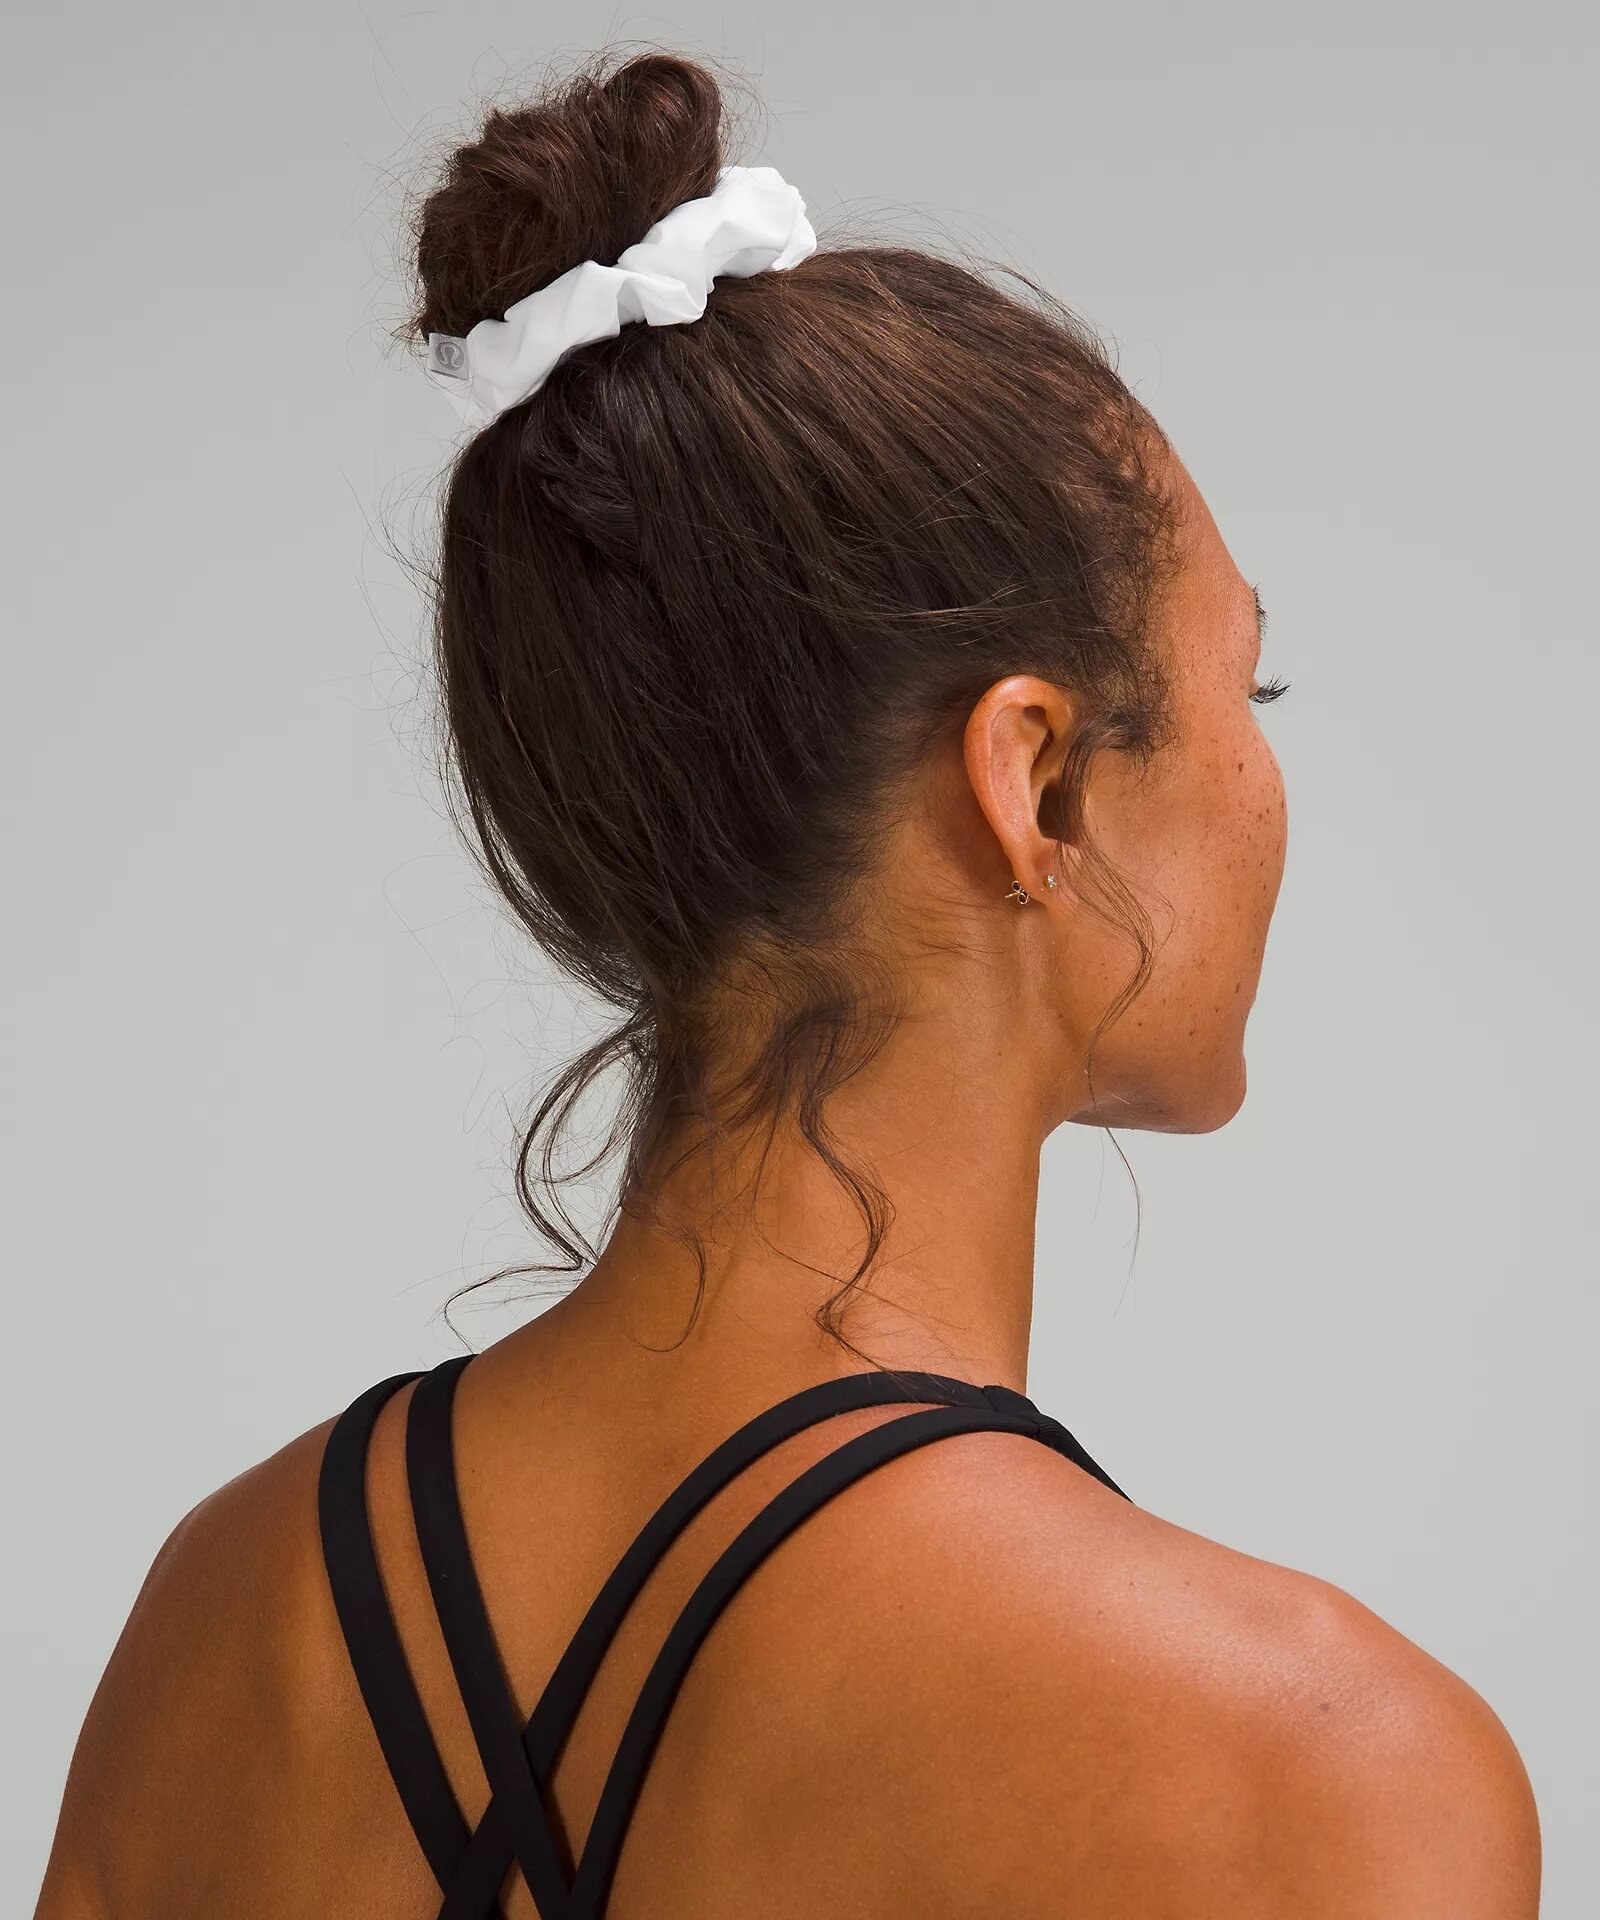 A person wearing the scrunchie in their hair